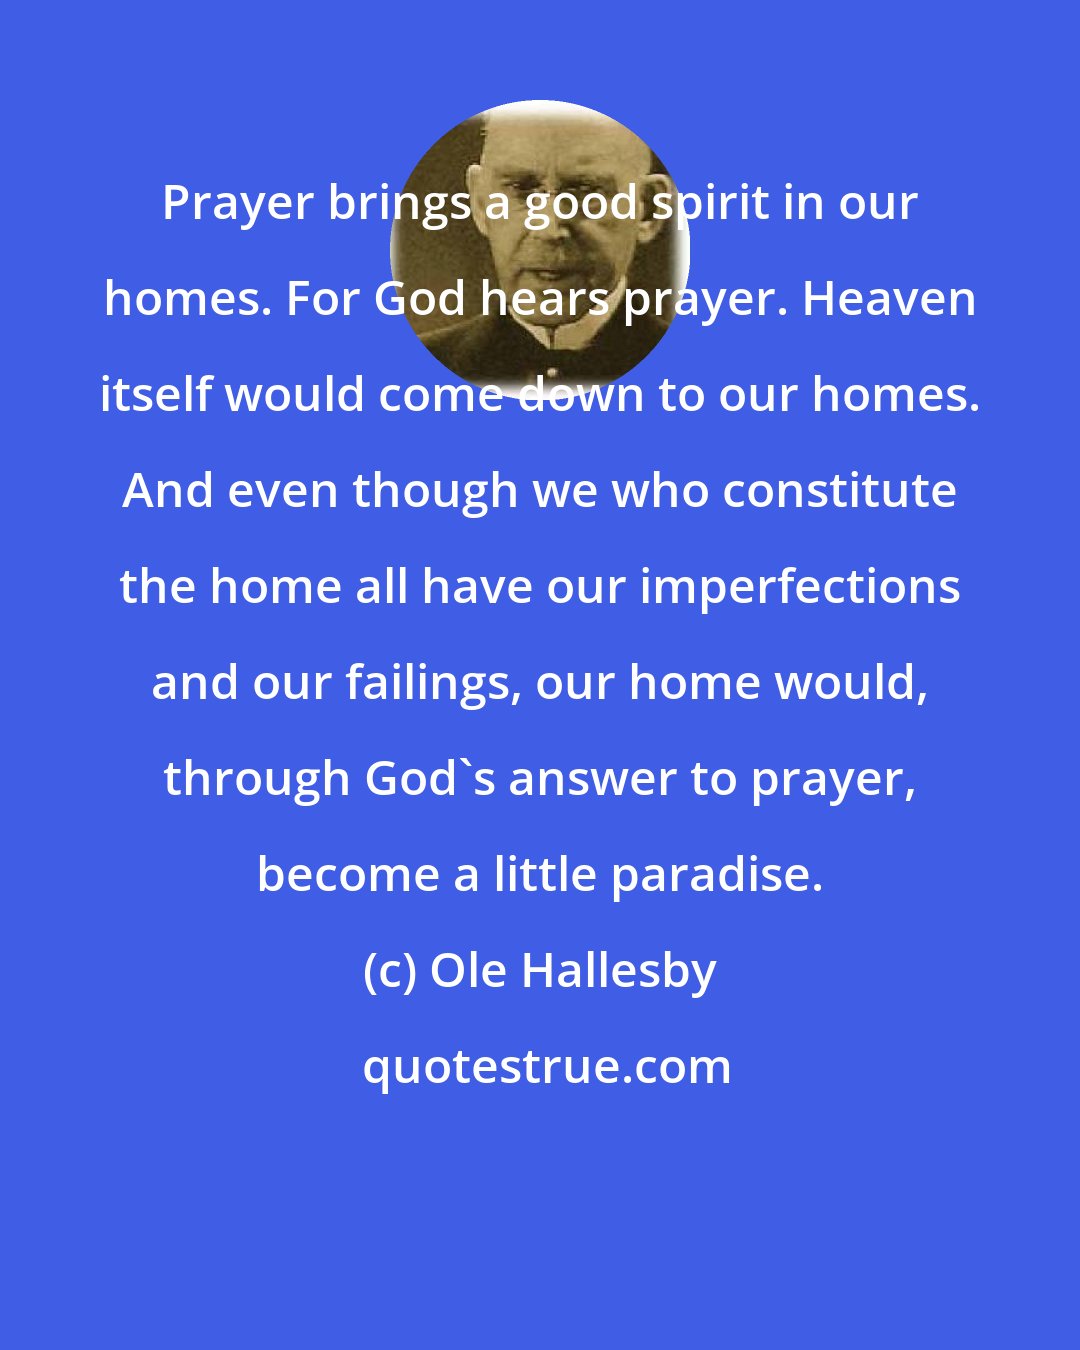 Ole Hallesby: Prayer brings a good spirit in our homes. For God hears prayer. Heaven itself would come down to our homes. And even though we who constitute the home all have our imperfections and our failings, our home would, through God's answer to prayer, become a little paradise.